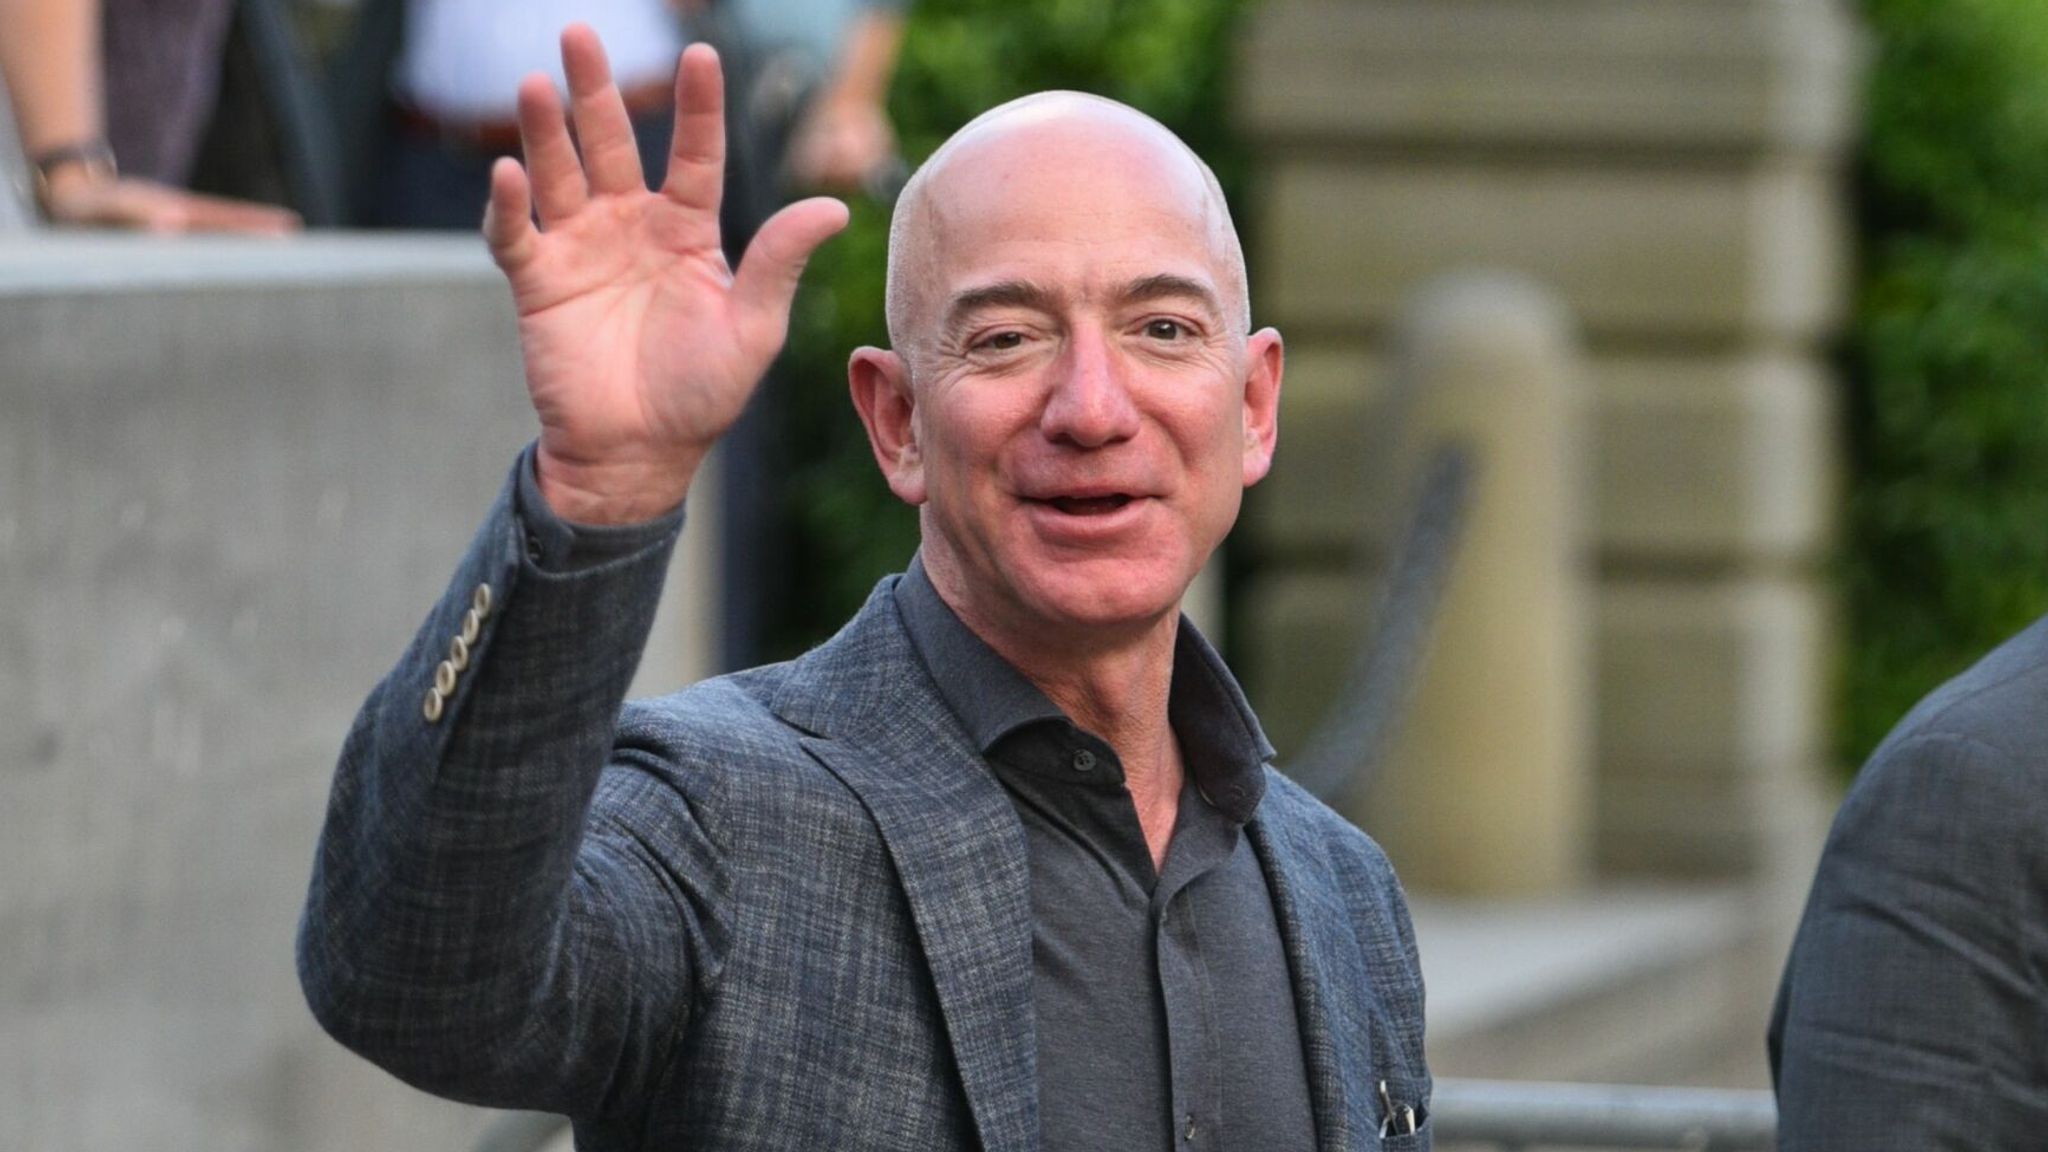 Jeff Bezos waving his hand whil wearing a gray suit